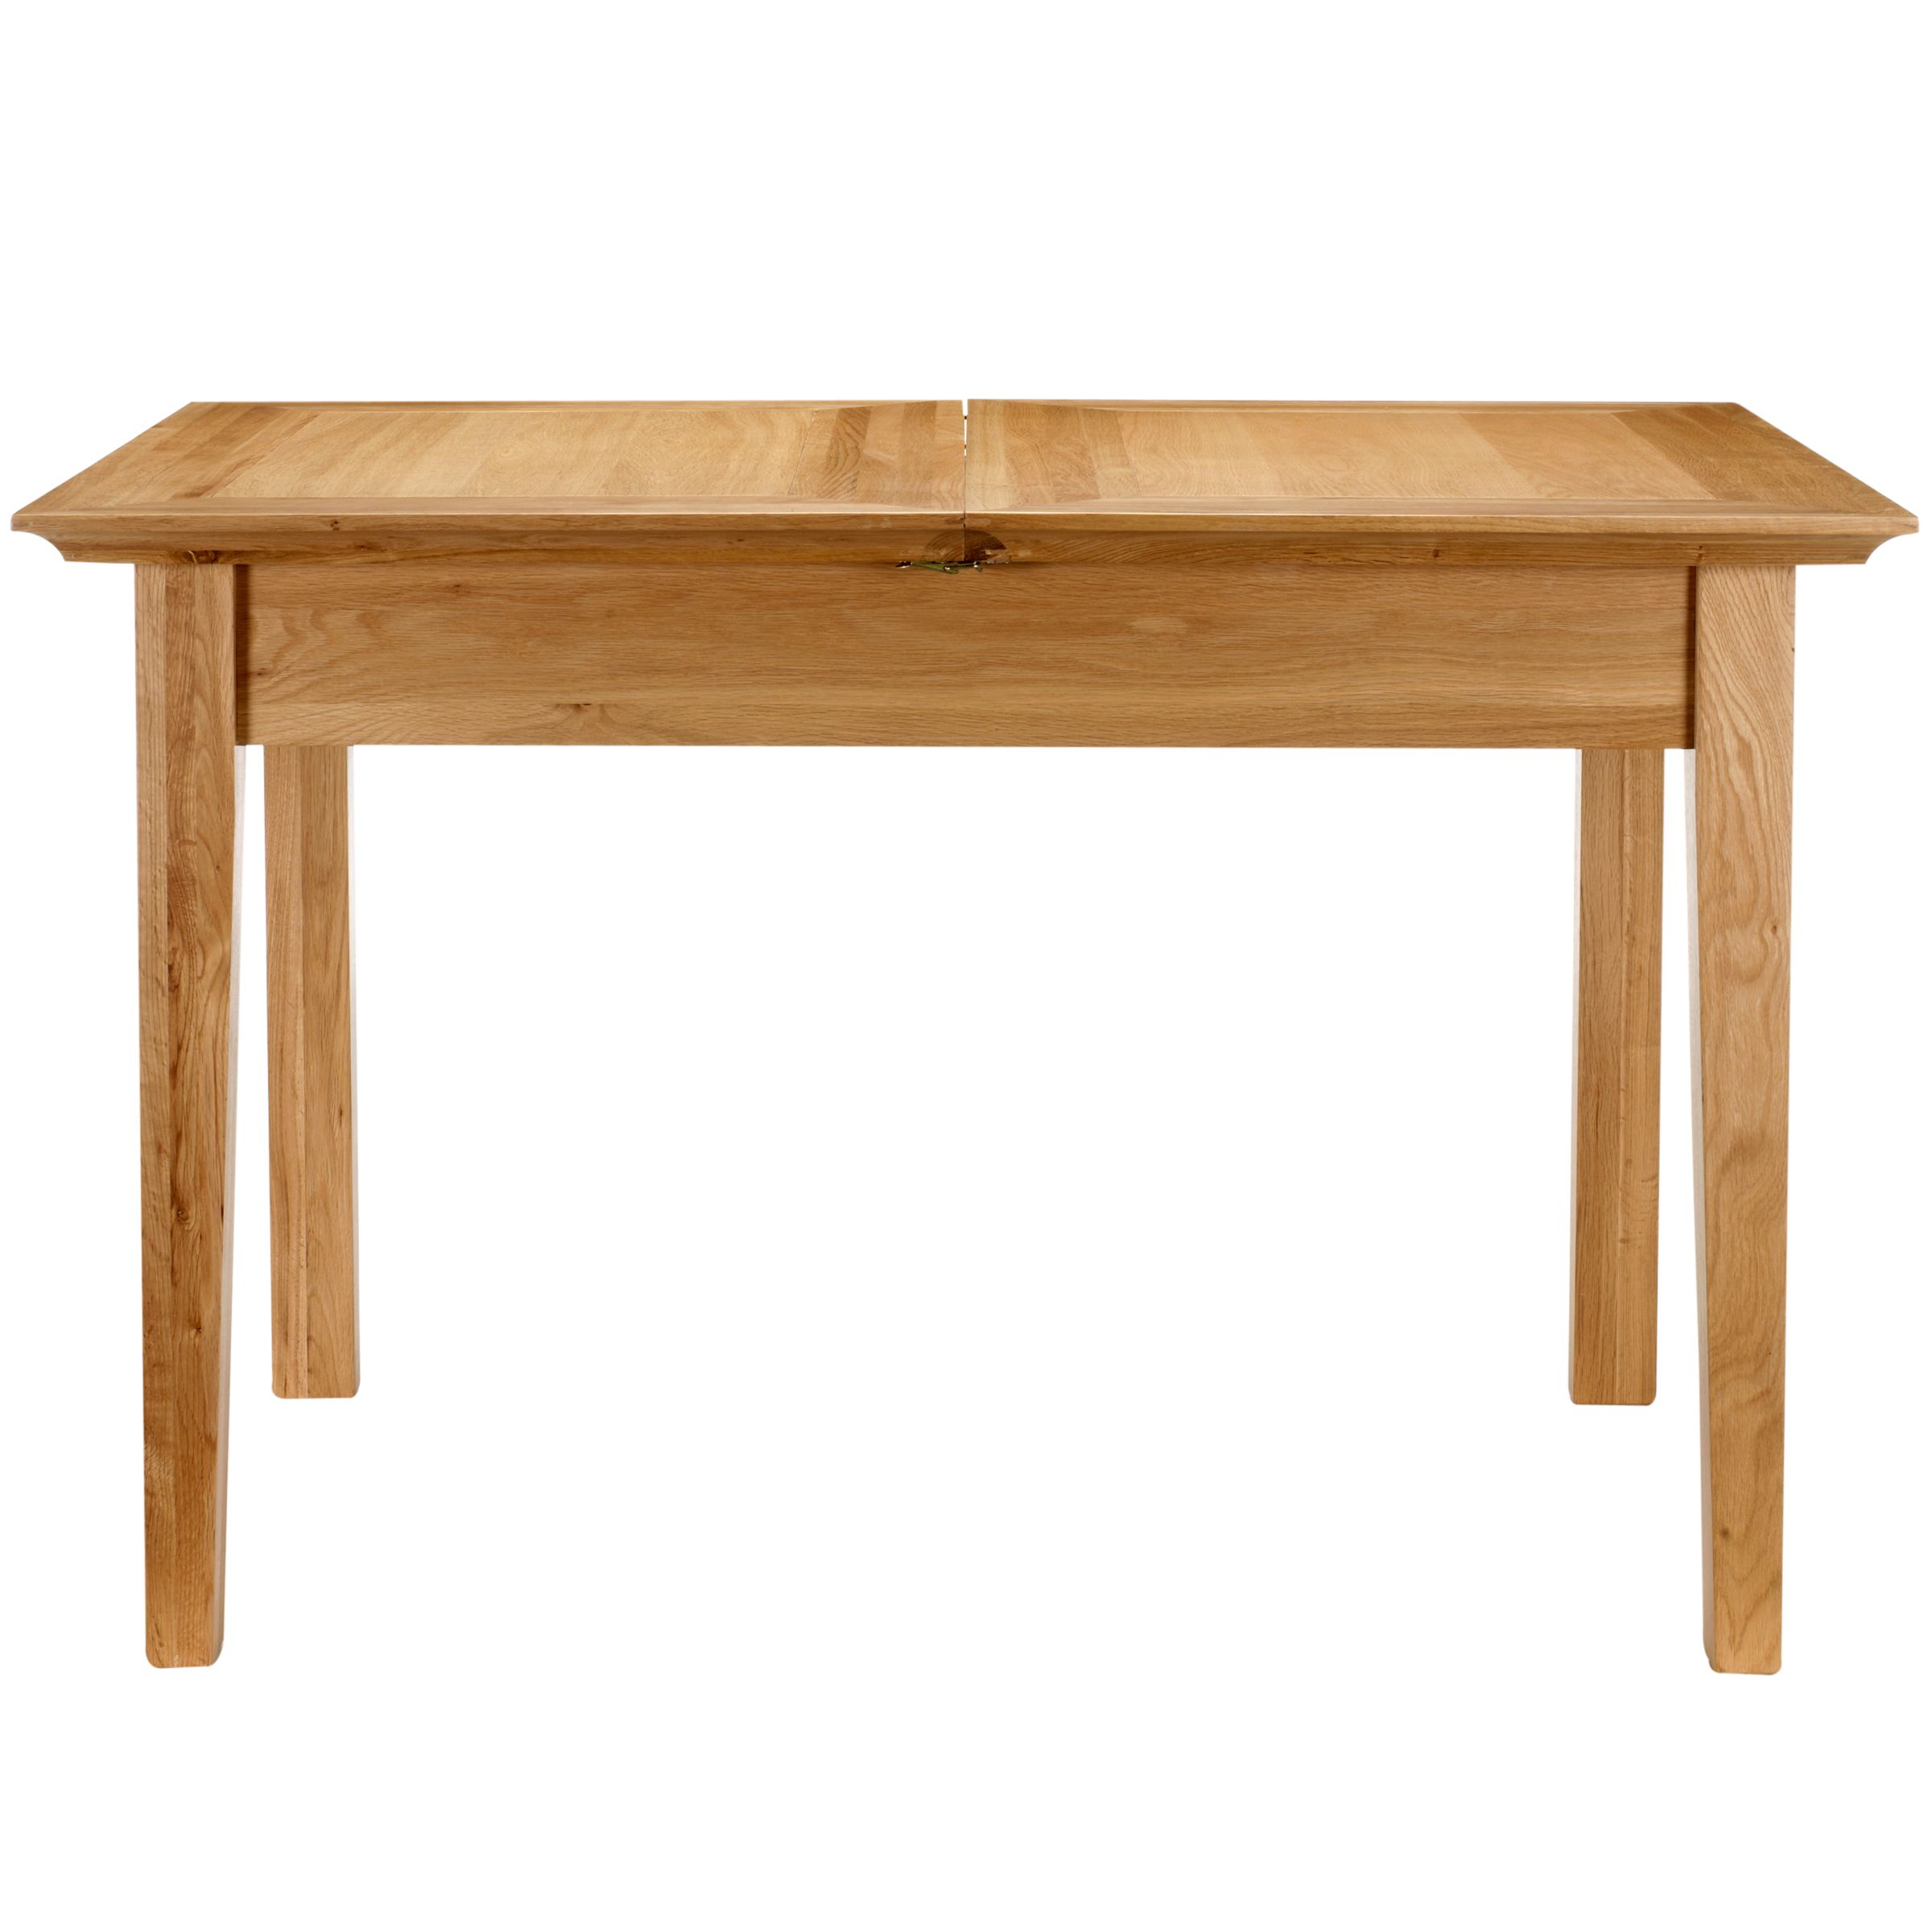 Esprit Extending Dining Table, Small